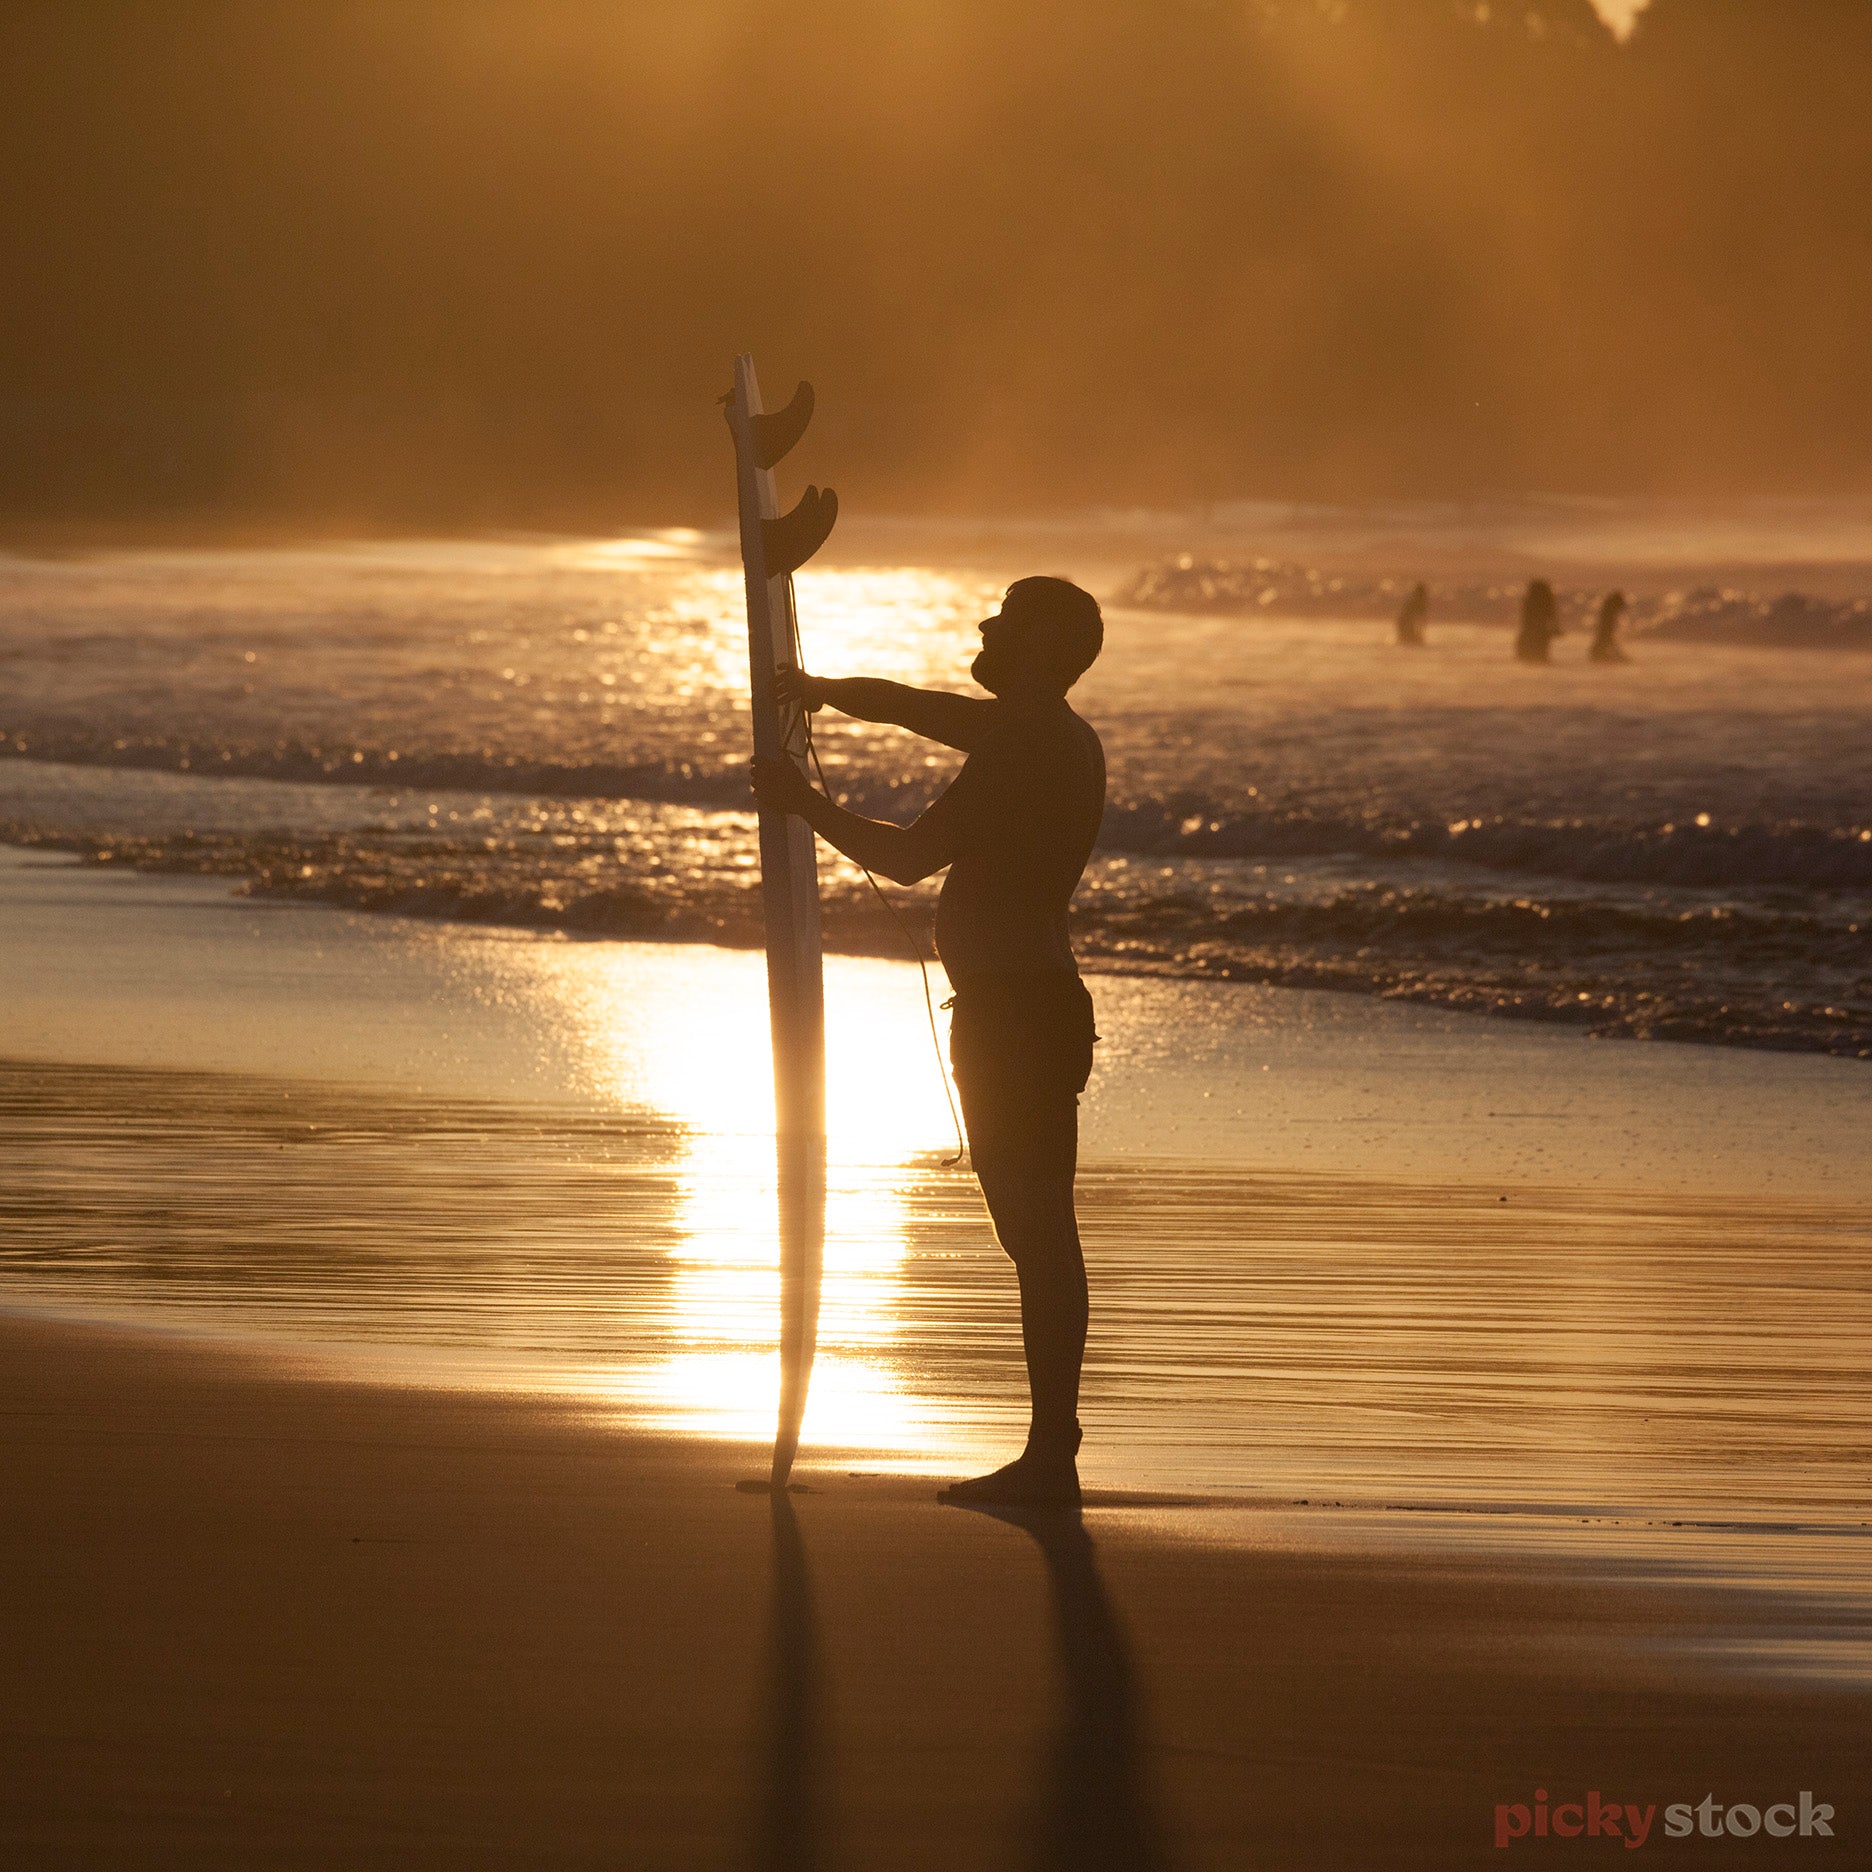 Surfers at Oakura Beach at sunset / sunrise. One man standing close to camera looking up to vertical surfboard. Surfers out in the ocean n the distance. Sky is golden,. 